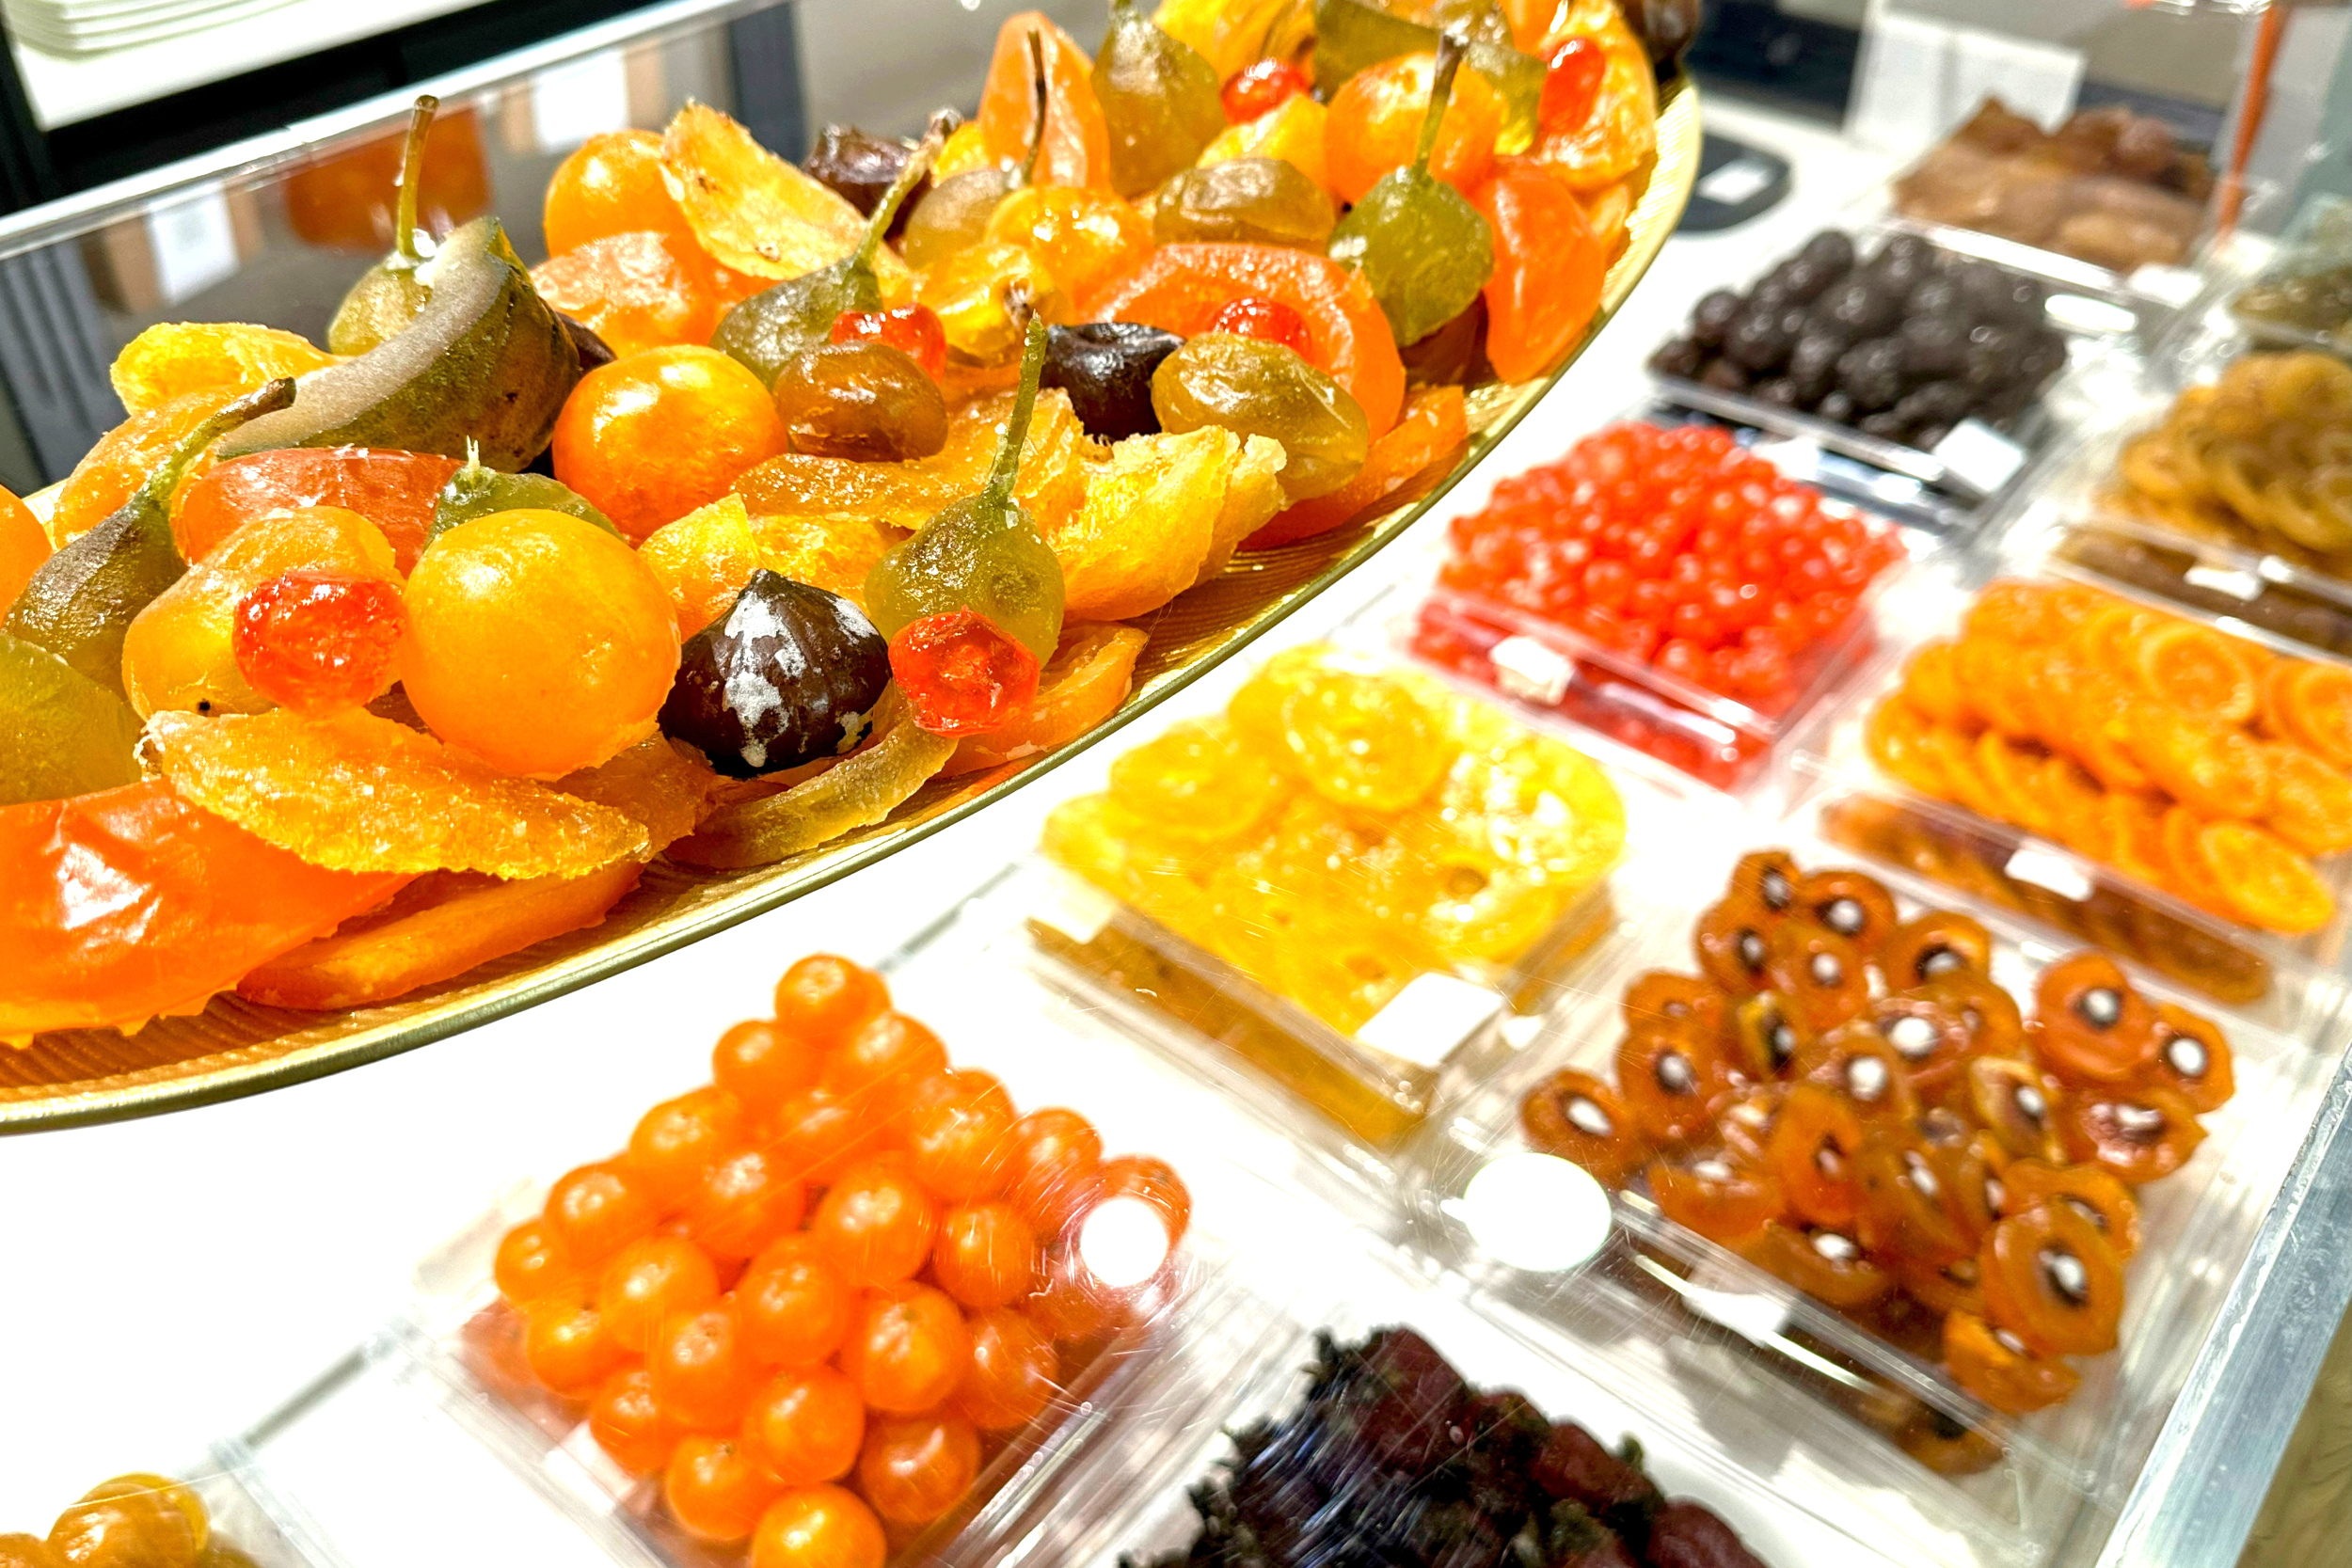 Candied fruits